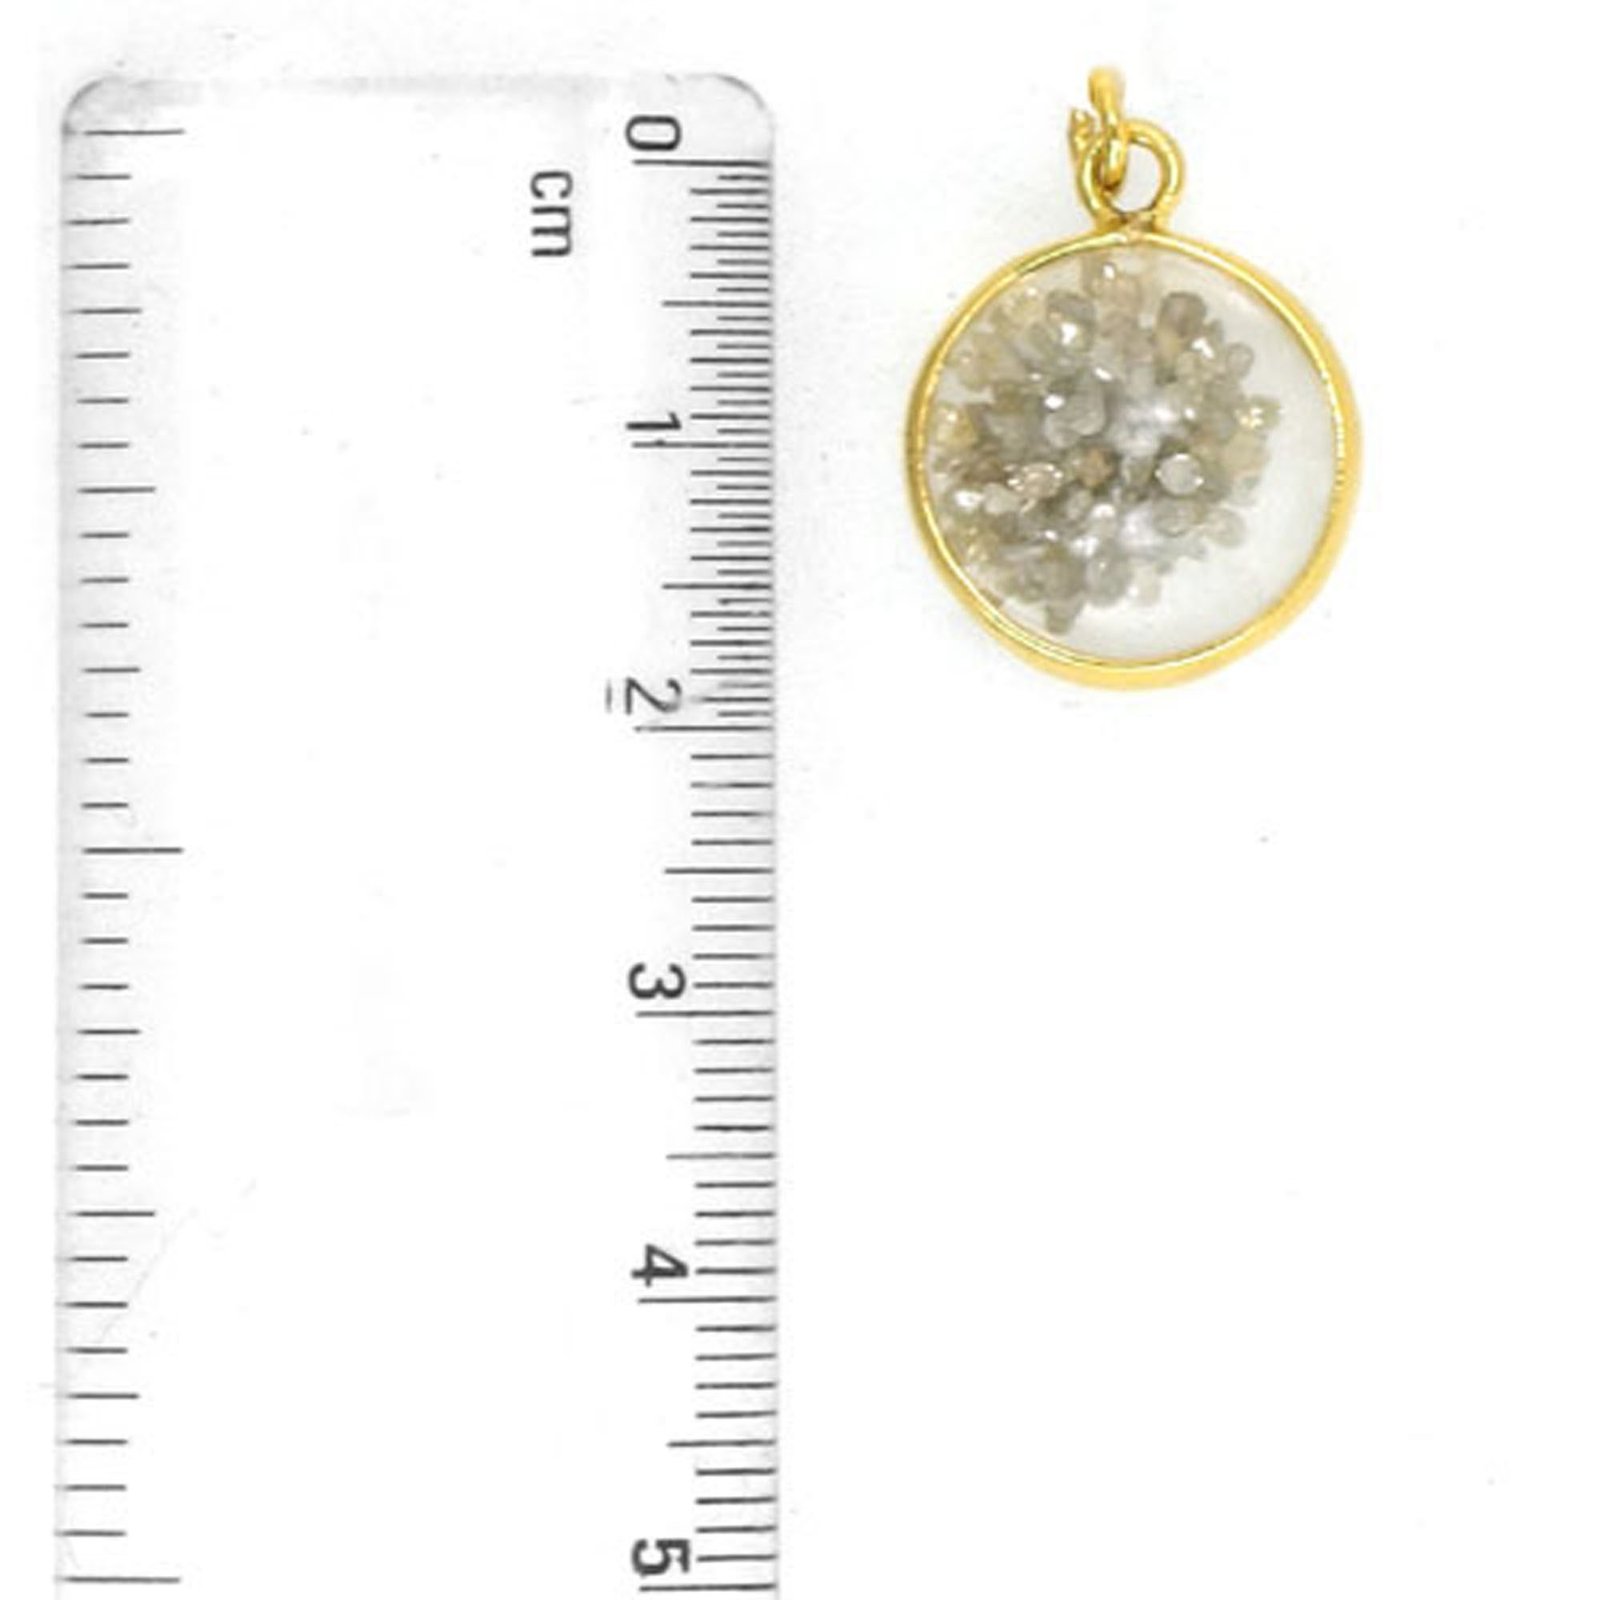 Crystal shaker pendant made in 14k solid gold with real diamond